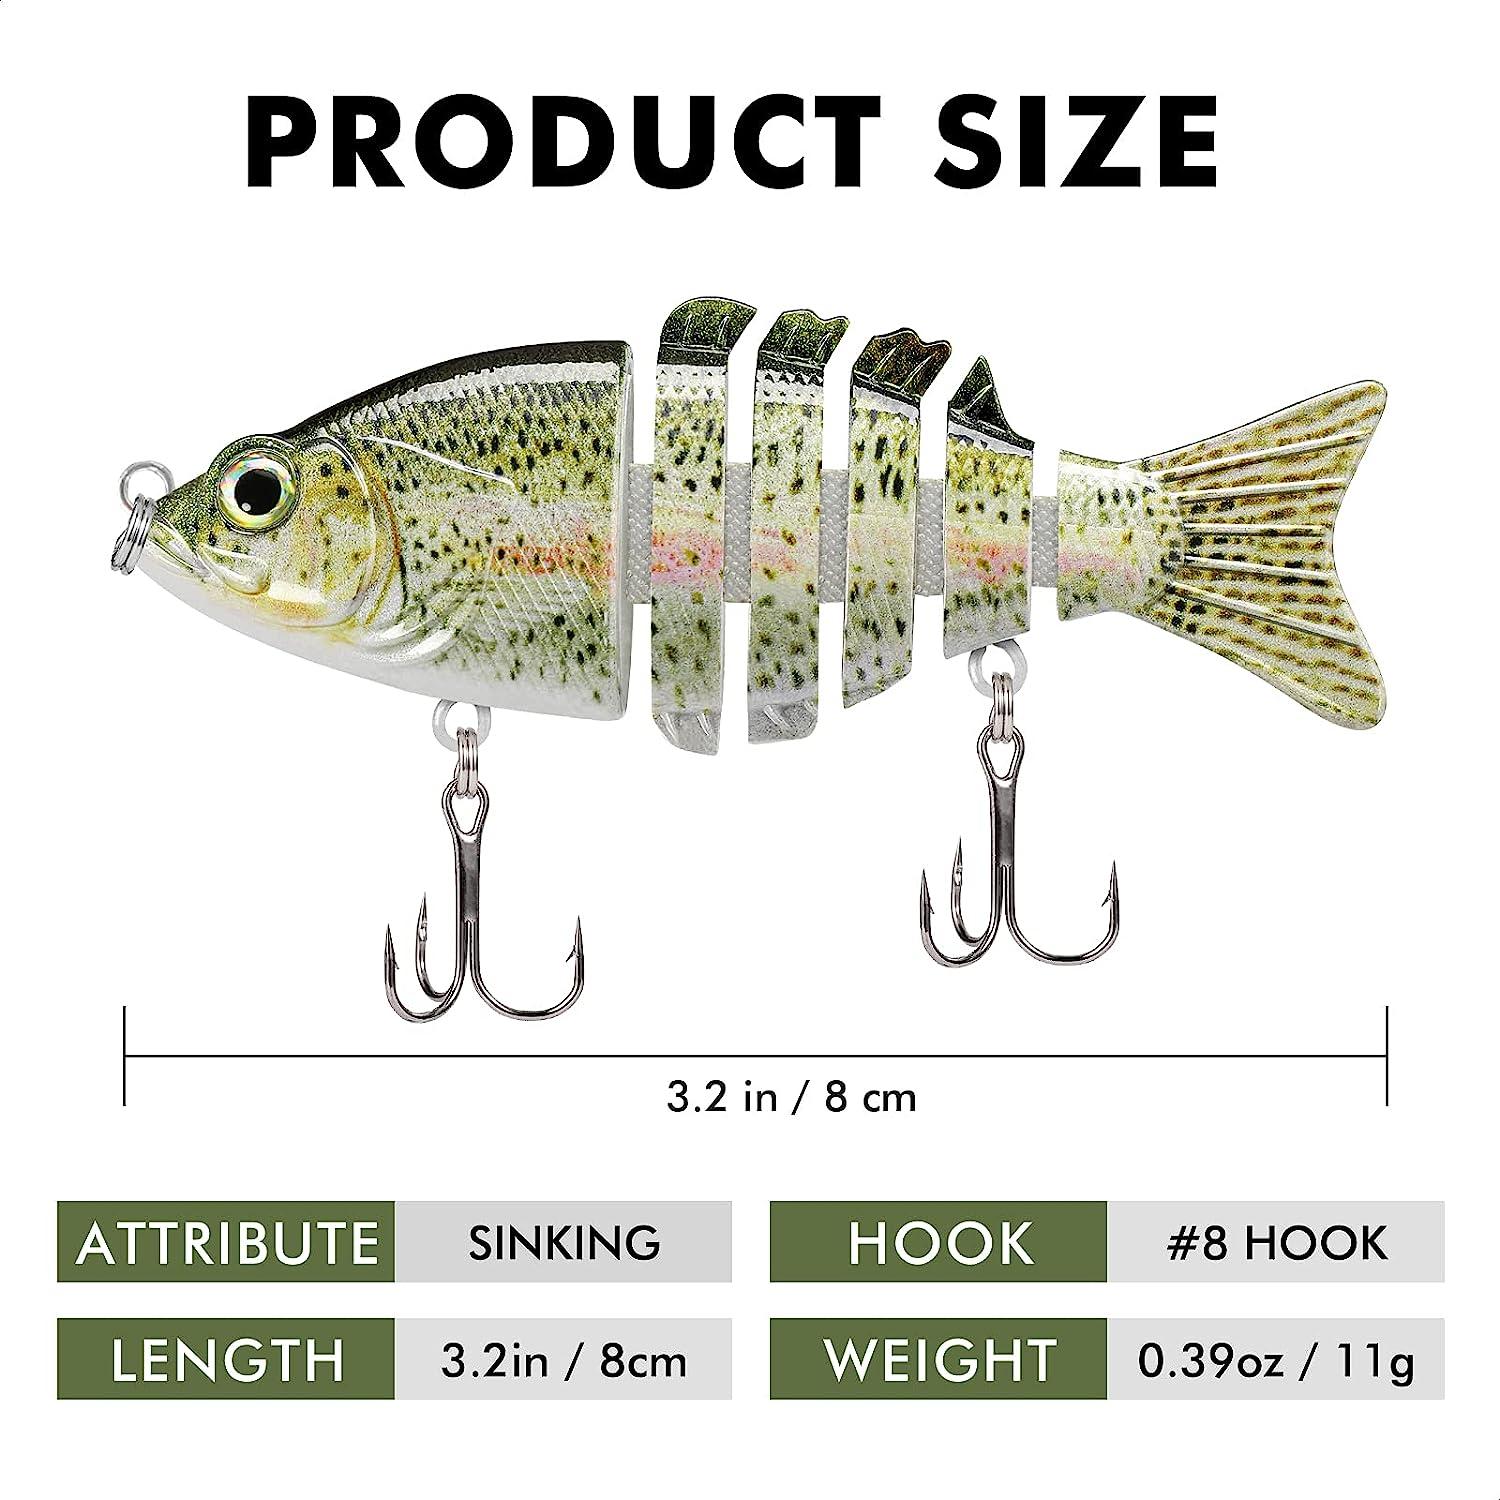 TRUSCEND Fishing Lures for Bass Trout, Multi Jointed Swimbaits, Slow  Sinking Bionic Swimming Lures for Freshwater Saltwater Bass Lifelike Fishing  Lures Kit A2-3,0.4oz